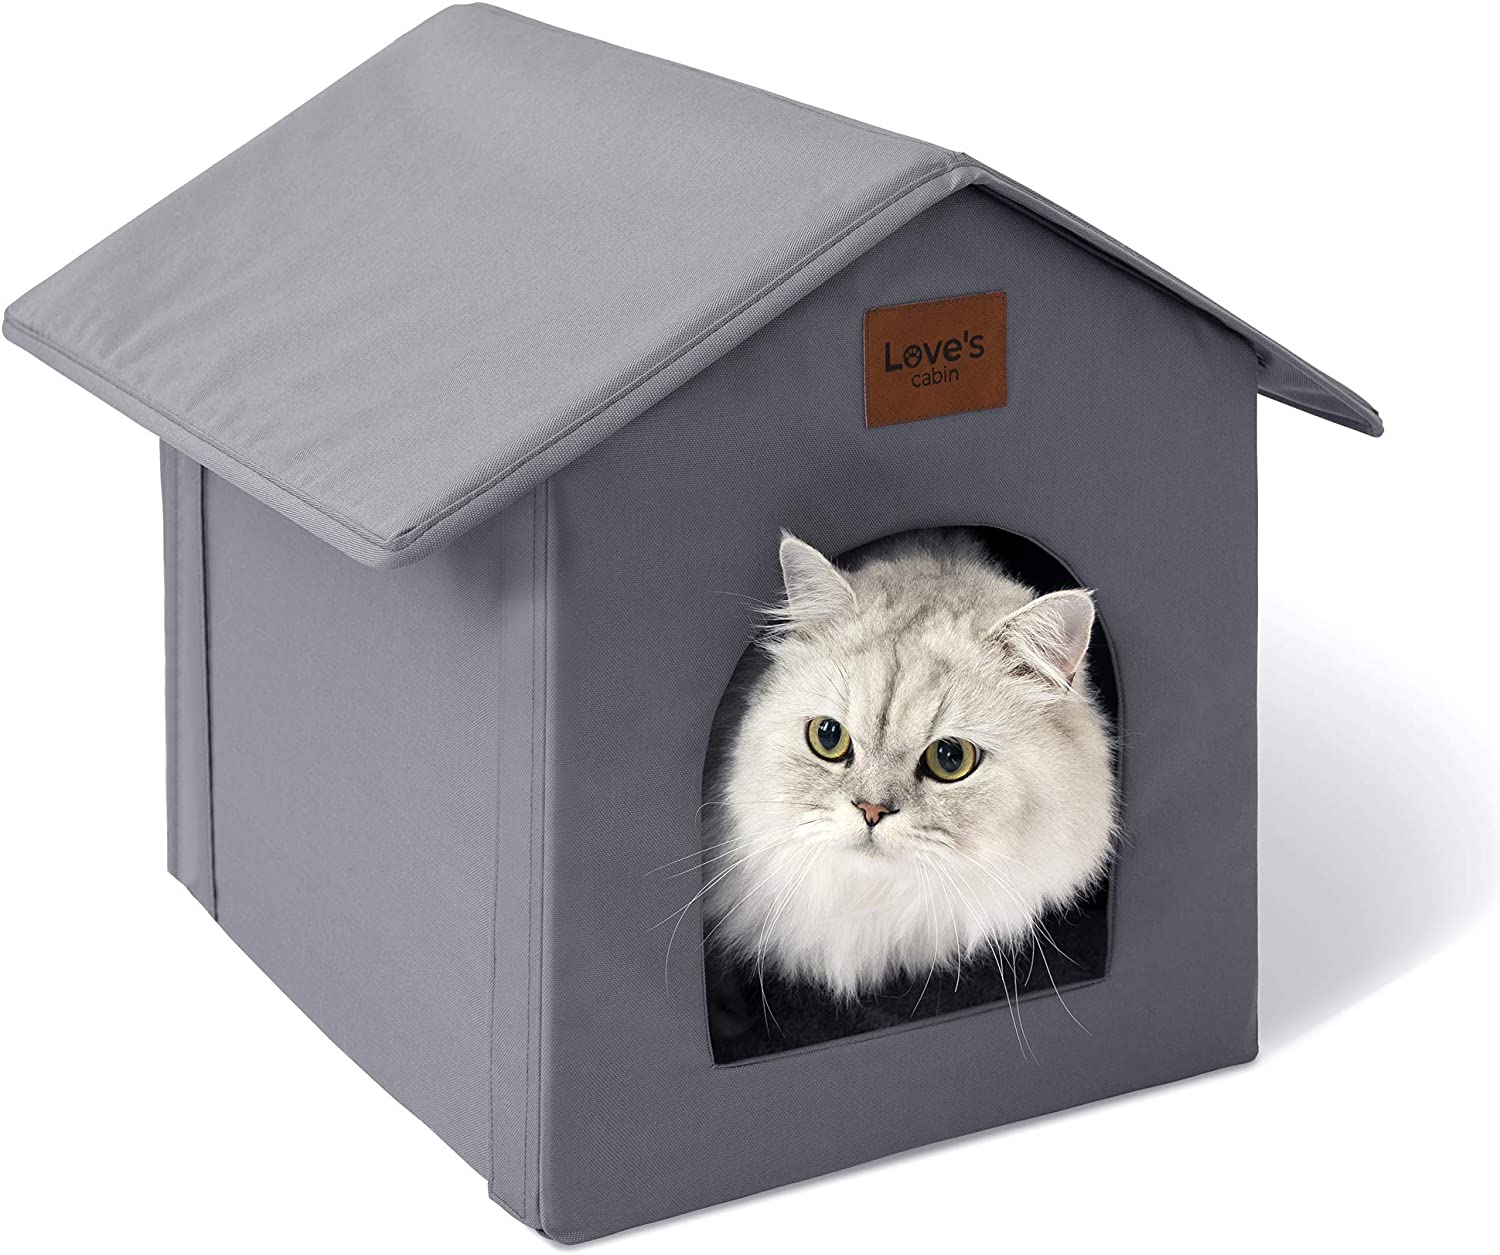 Love's cabin Outdoor Cat House Weatherproof for Winter, Collapsible Warm Cat House for Outdoor/Indoor Cats, Feral Cat Shelter with Removable Soft Mat, Easy to Assemble Igloo Dog House for Small Dogs…